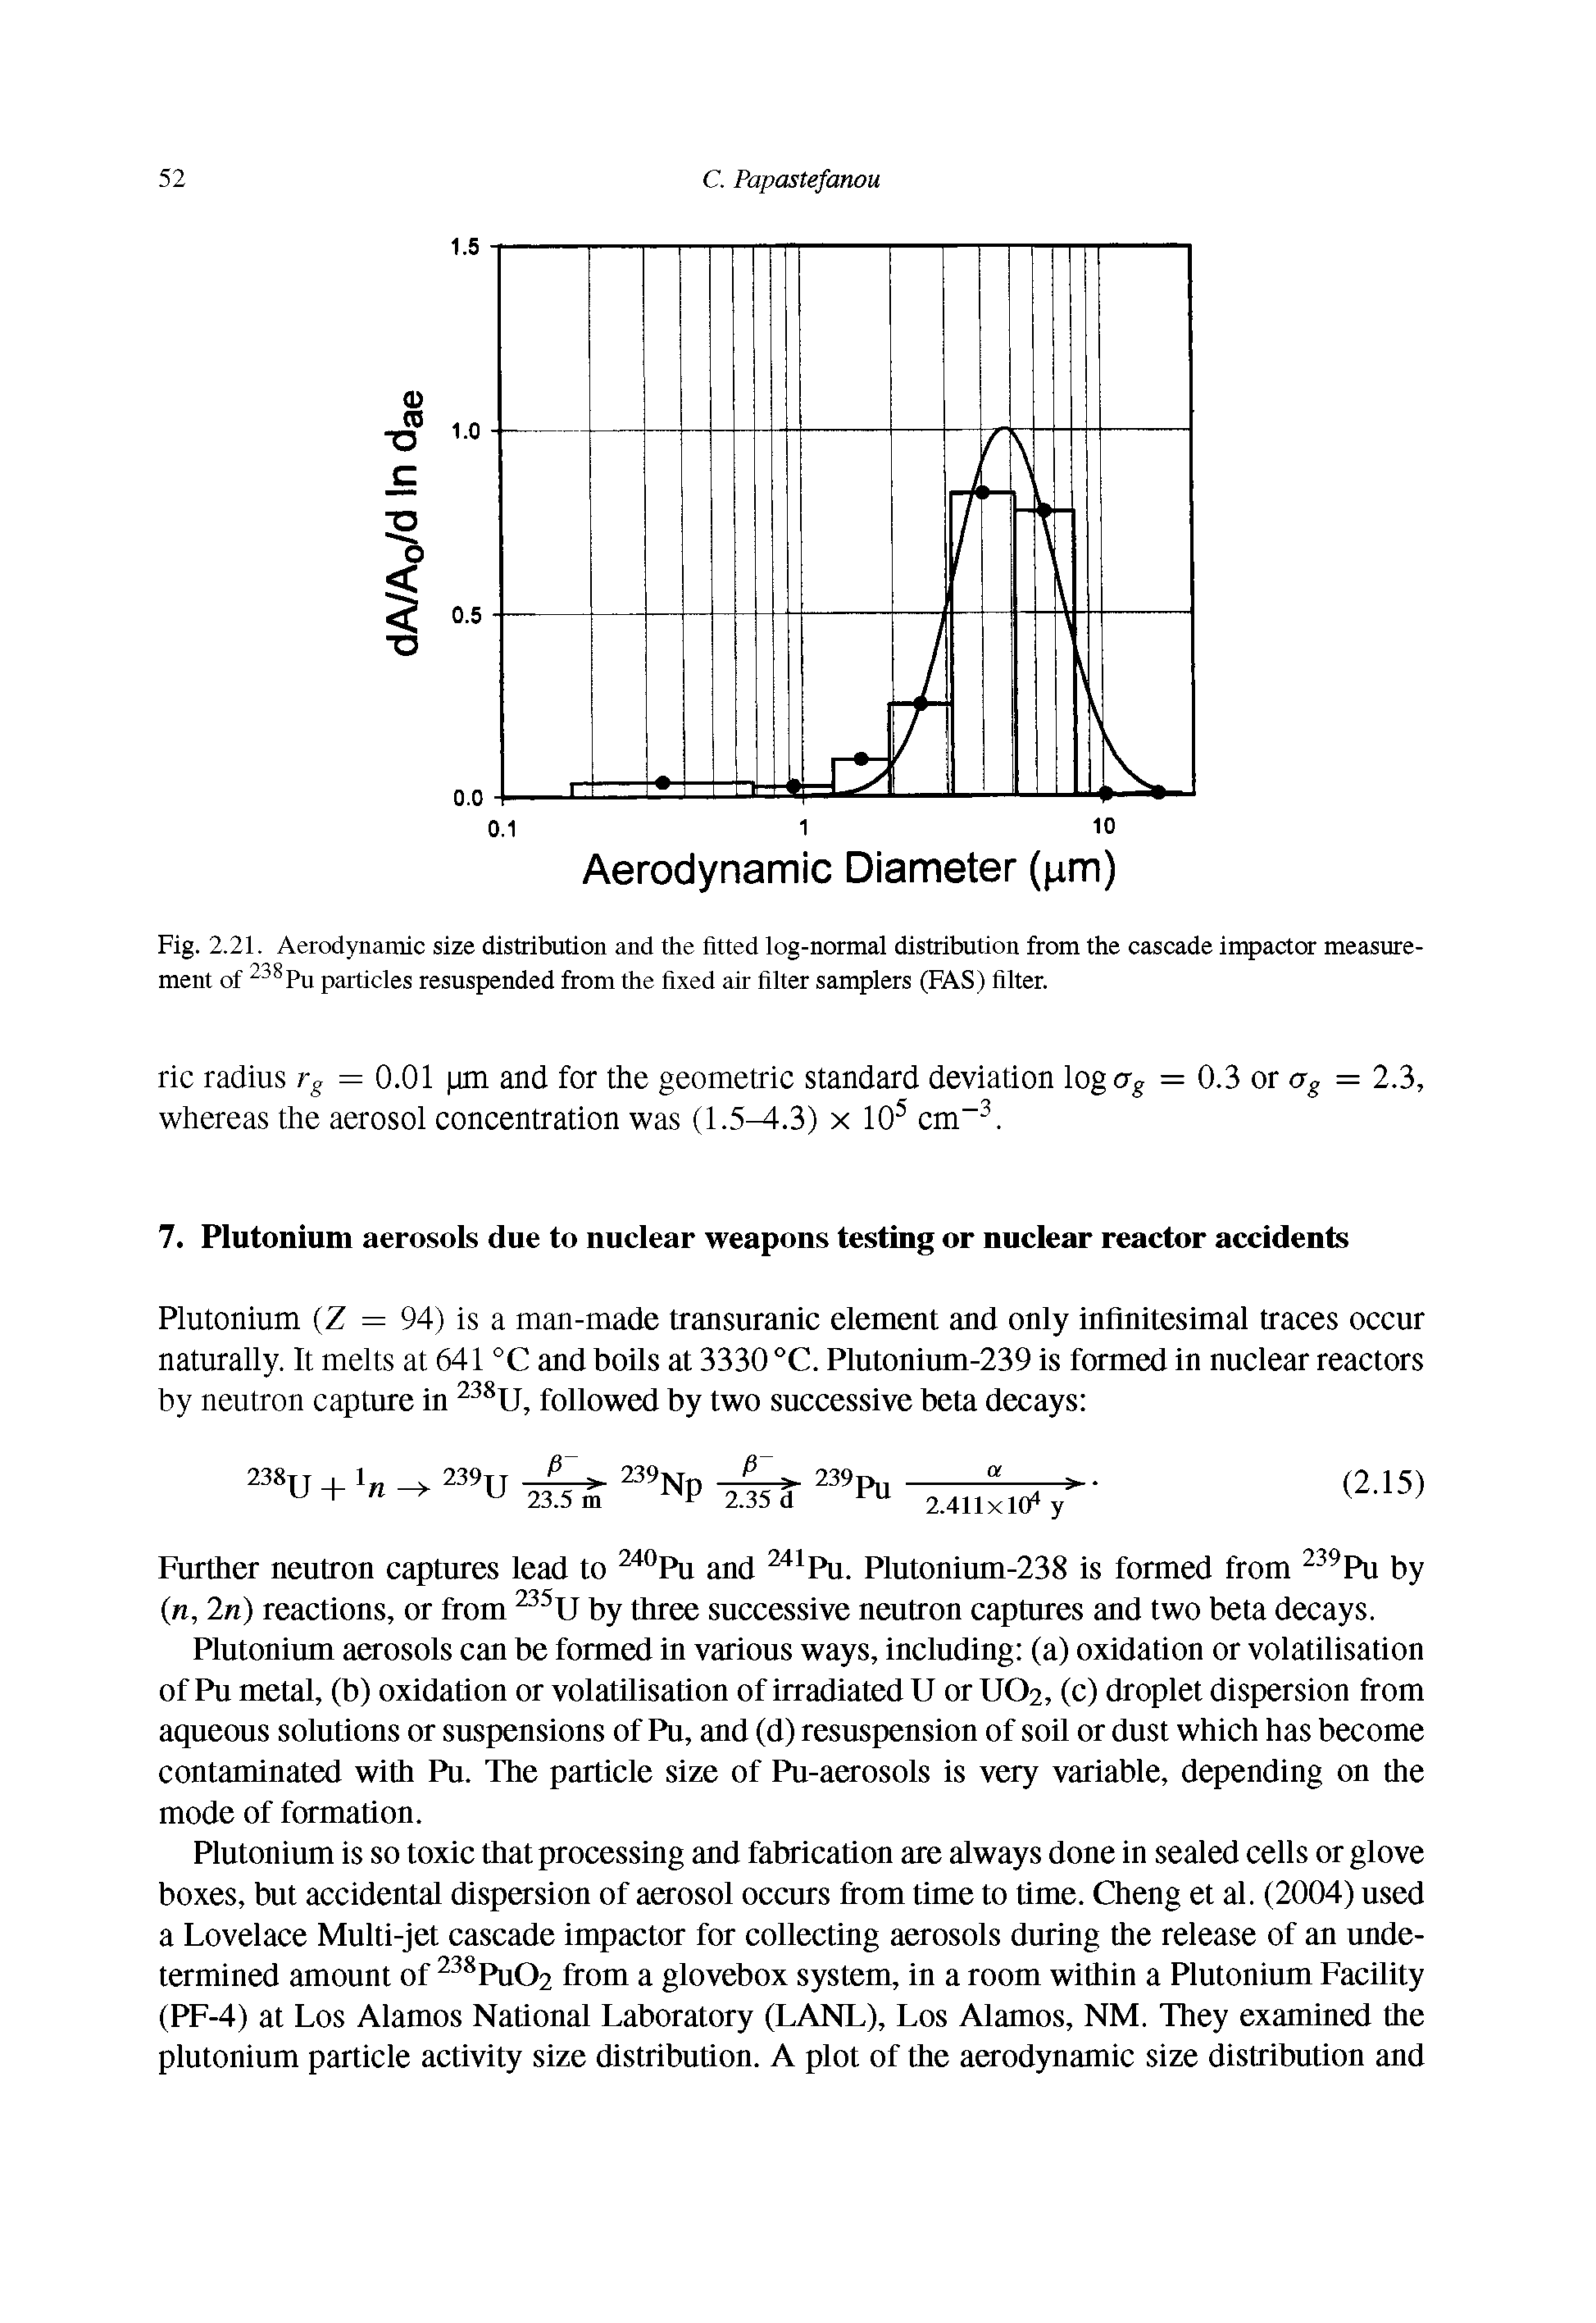 Fig. 2.21. Aerodynamic size distribution and the fitted log-normal distribution from the cascade impactor measurement of particles resuspended from the fixed air filter samplers (FAS) filter.